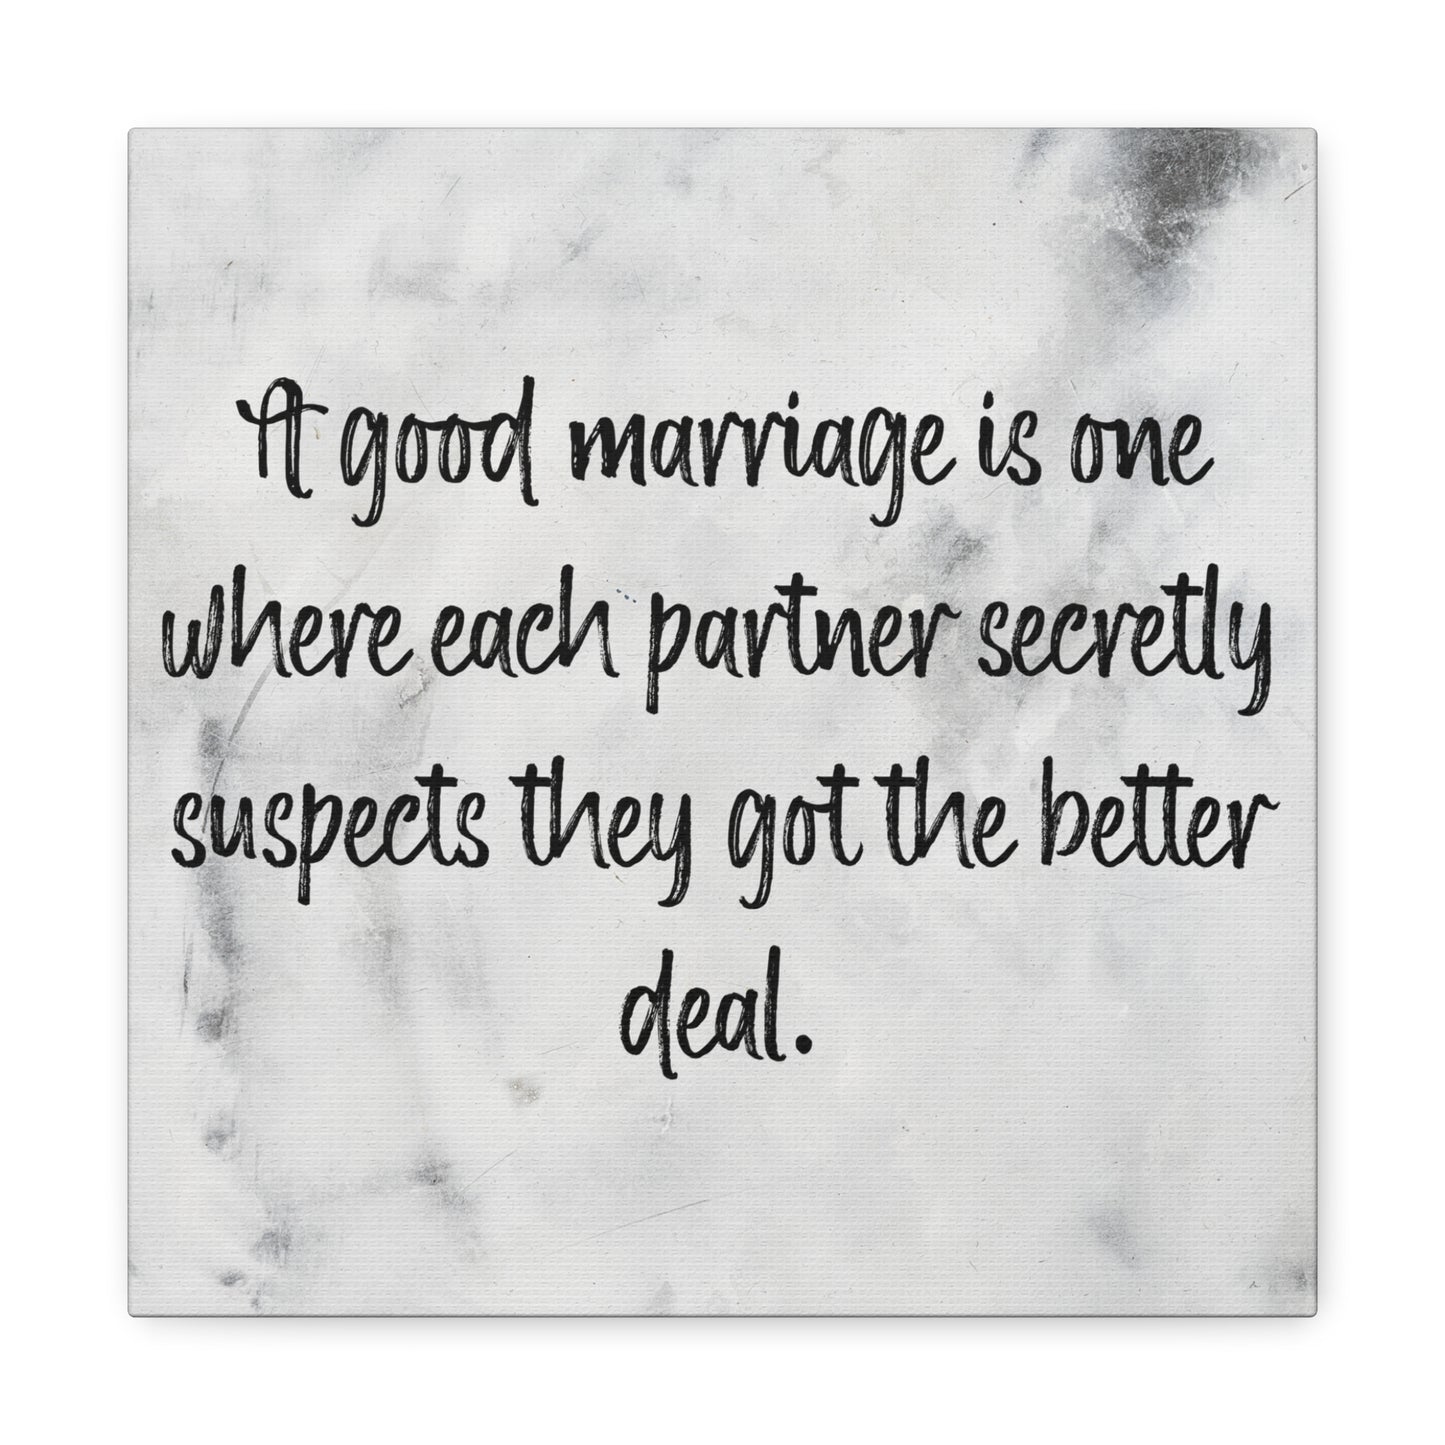 a good marriage is one where each partner secretly suspects they got the better deal